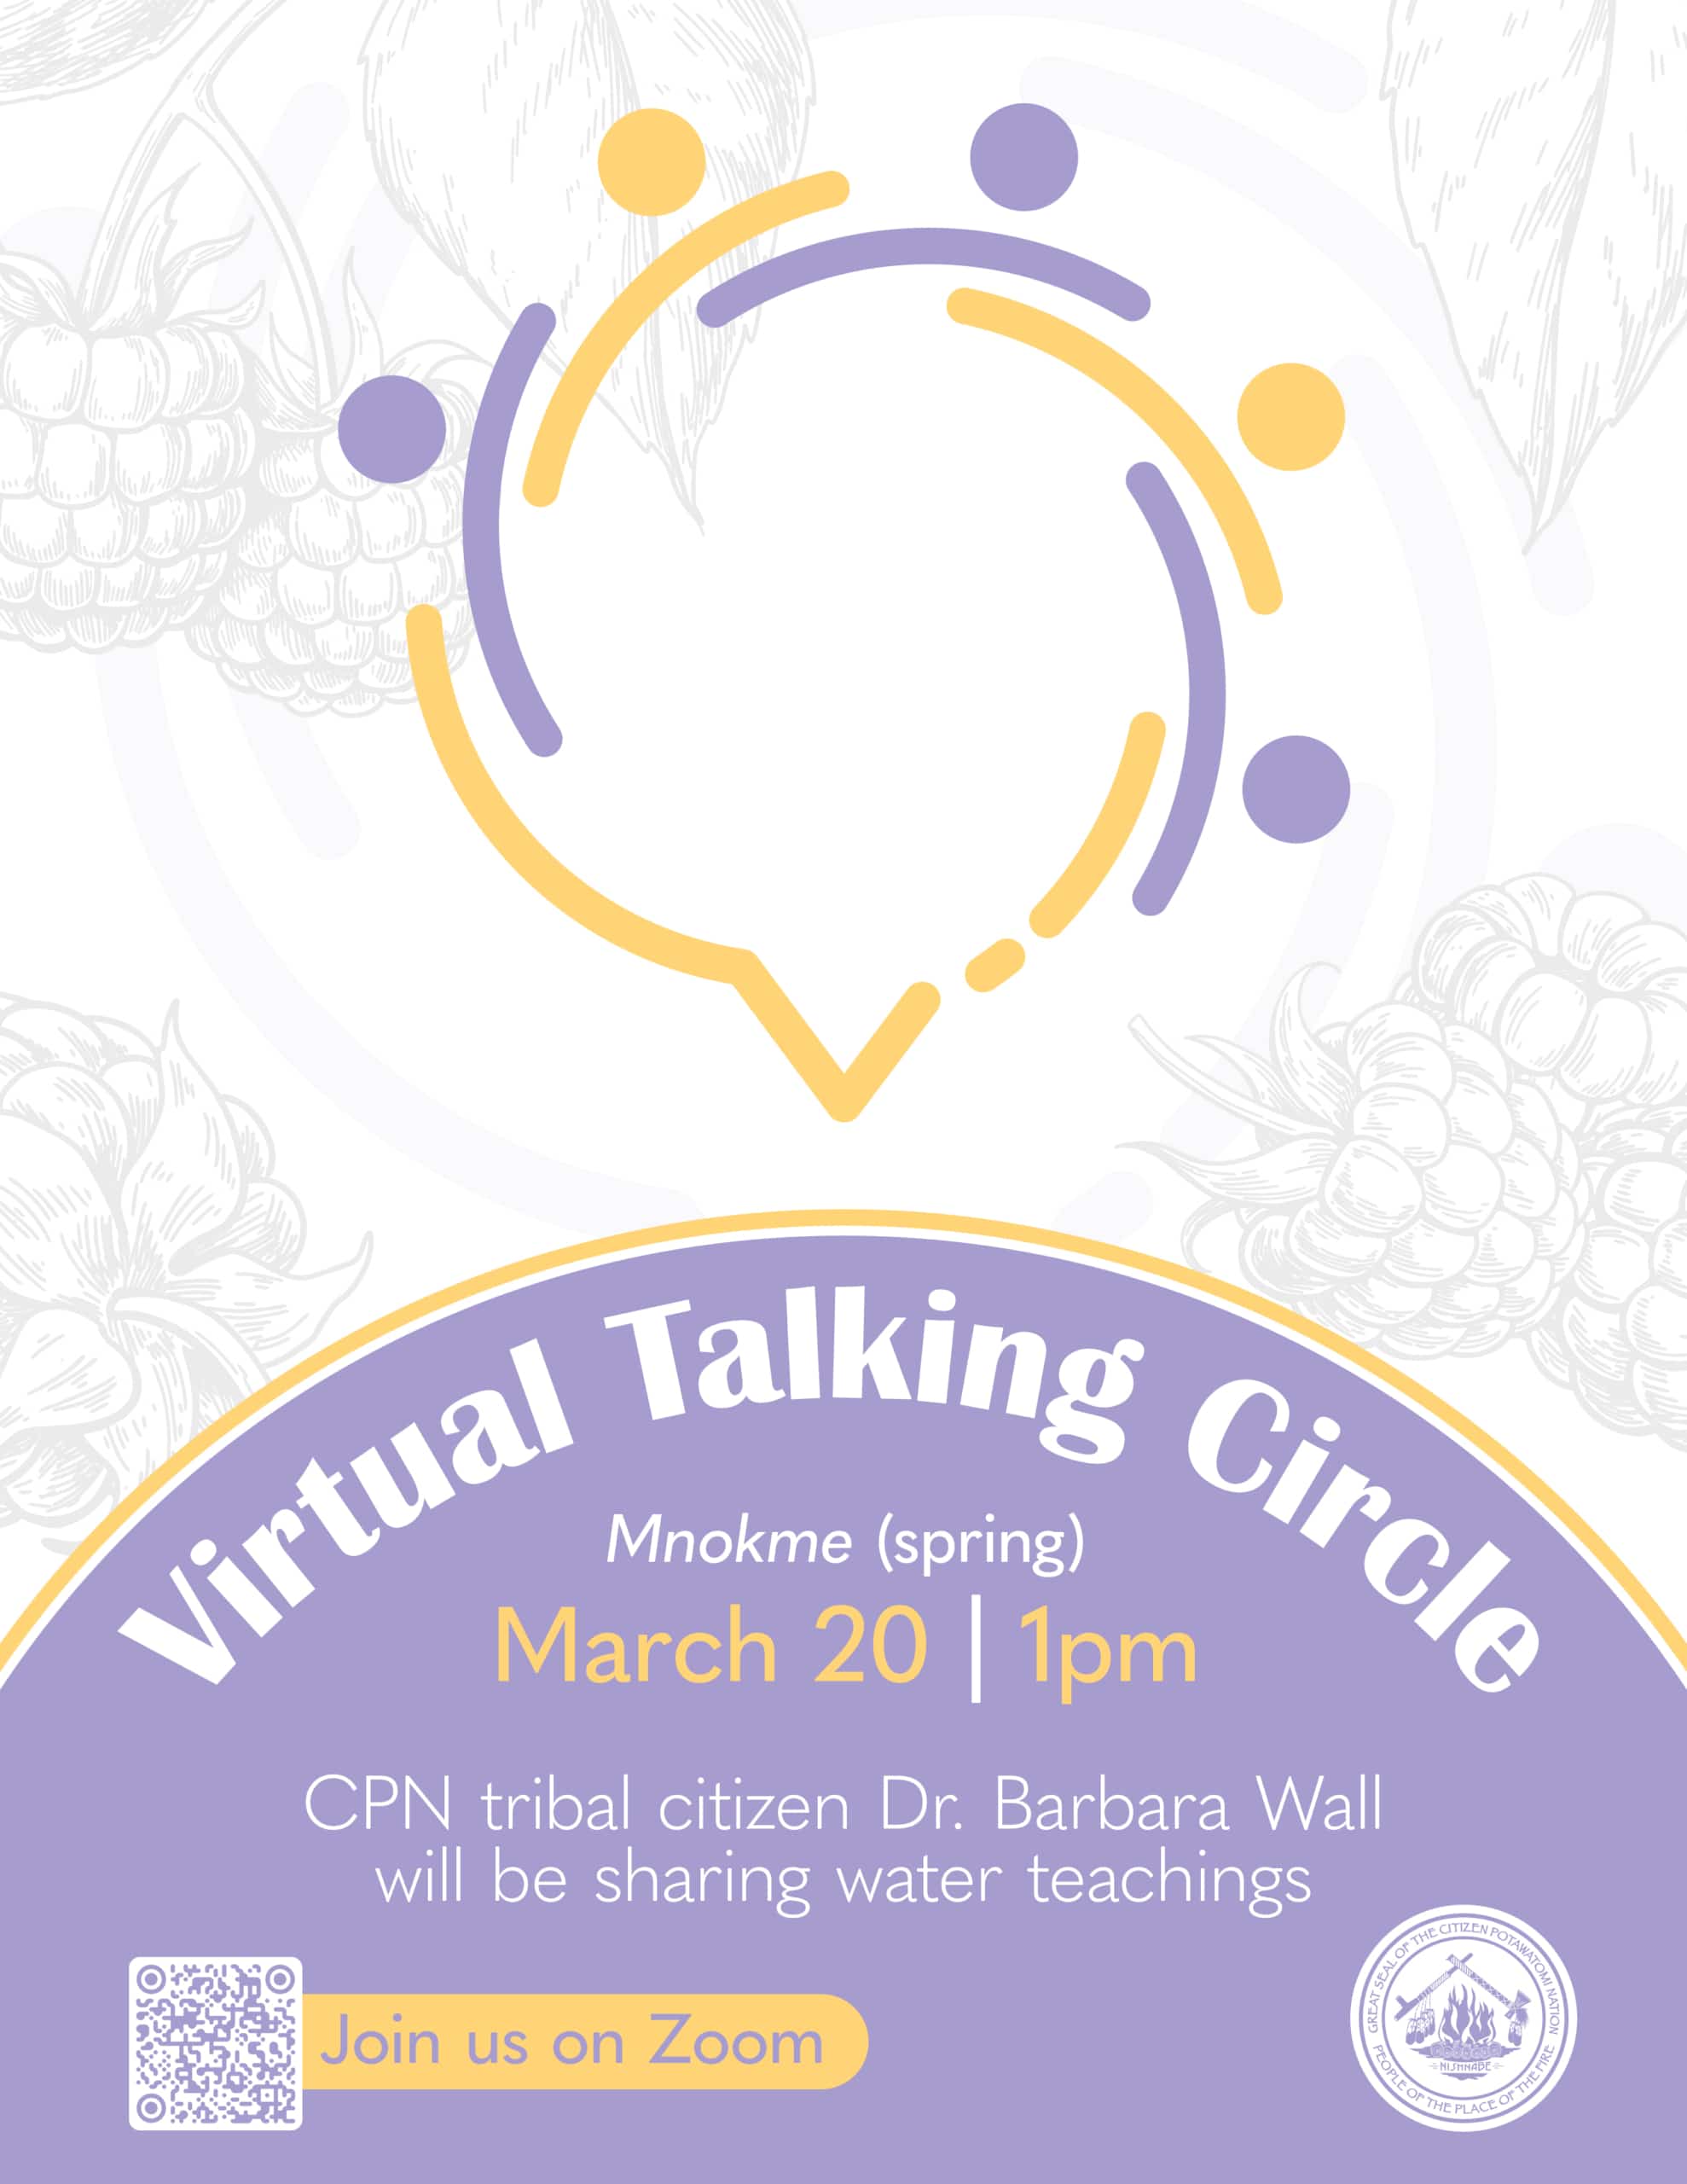 Purple and yellow stick figures create a speech bubble above a purple circle announcing the Spring Talking Circle on March 20 featuring teachings on water from CPN tribal member Dr. Barbara Wall.